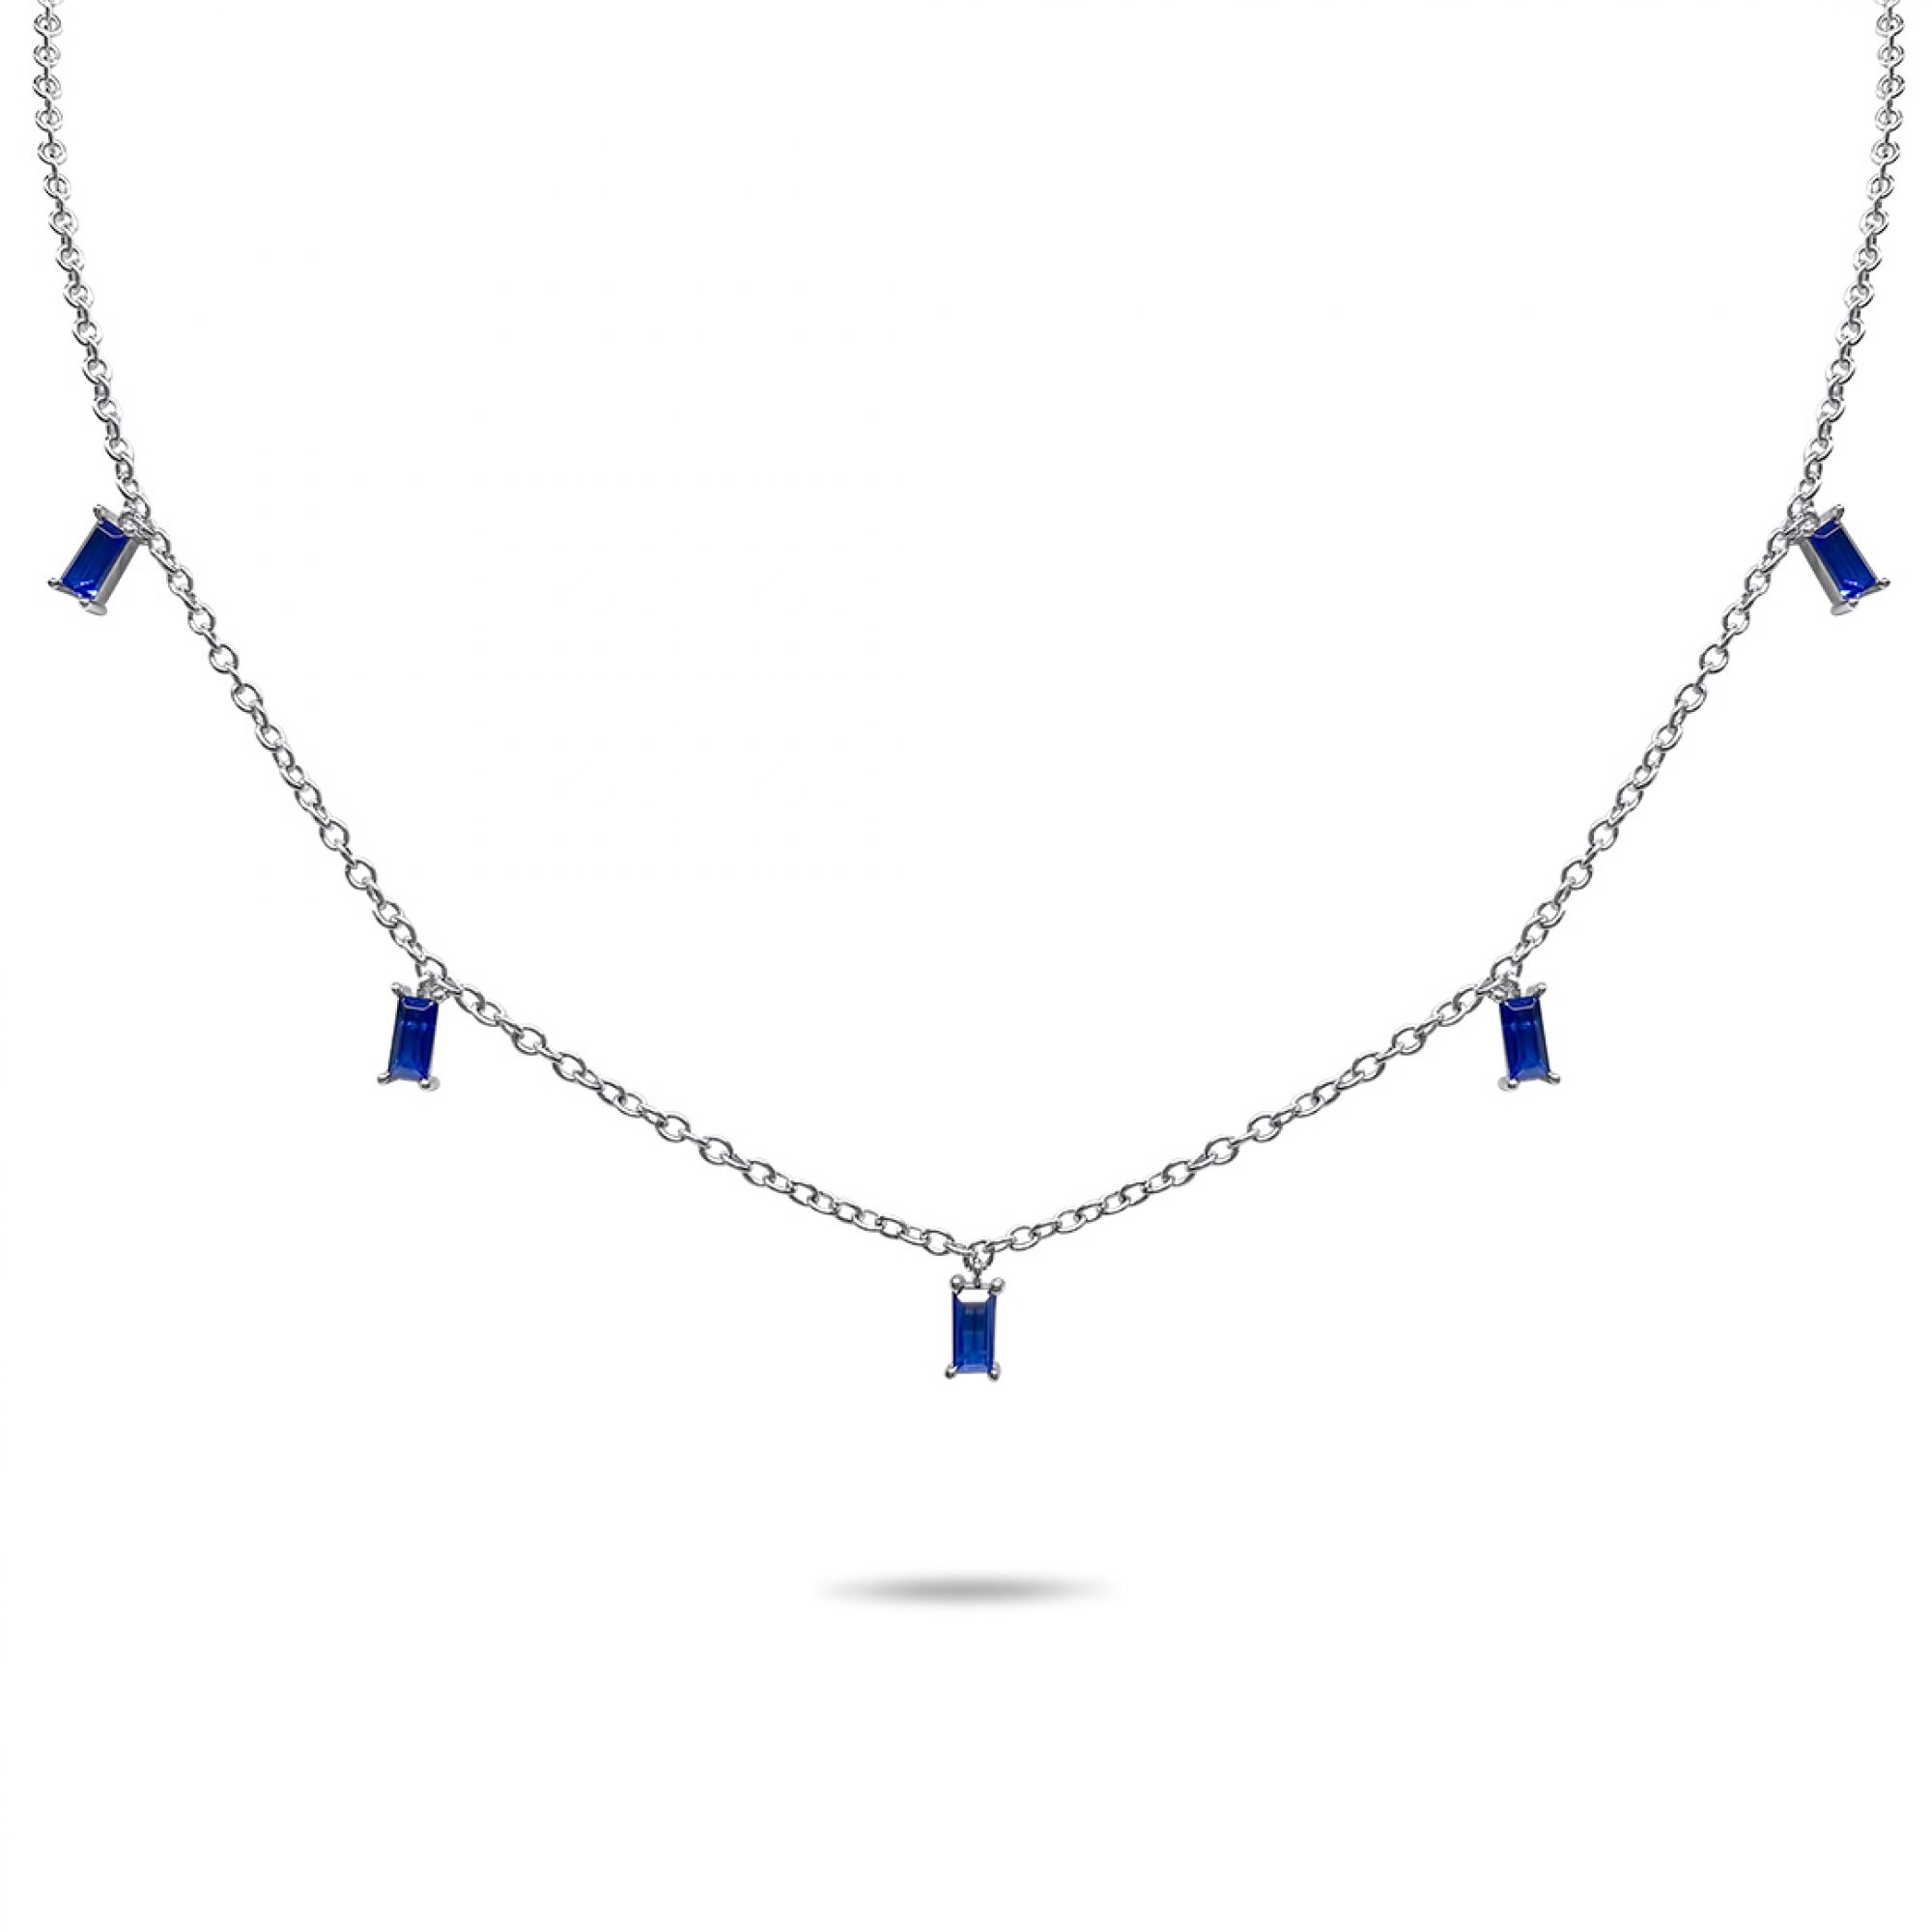 Dangle necklace with sapphire stones